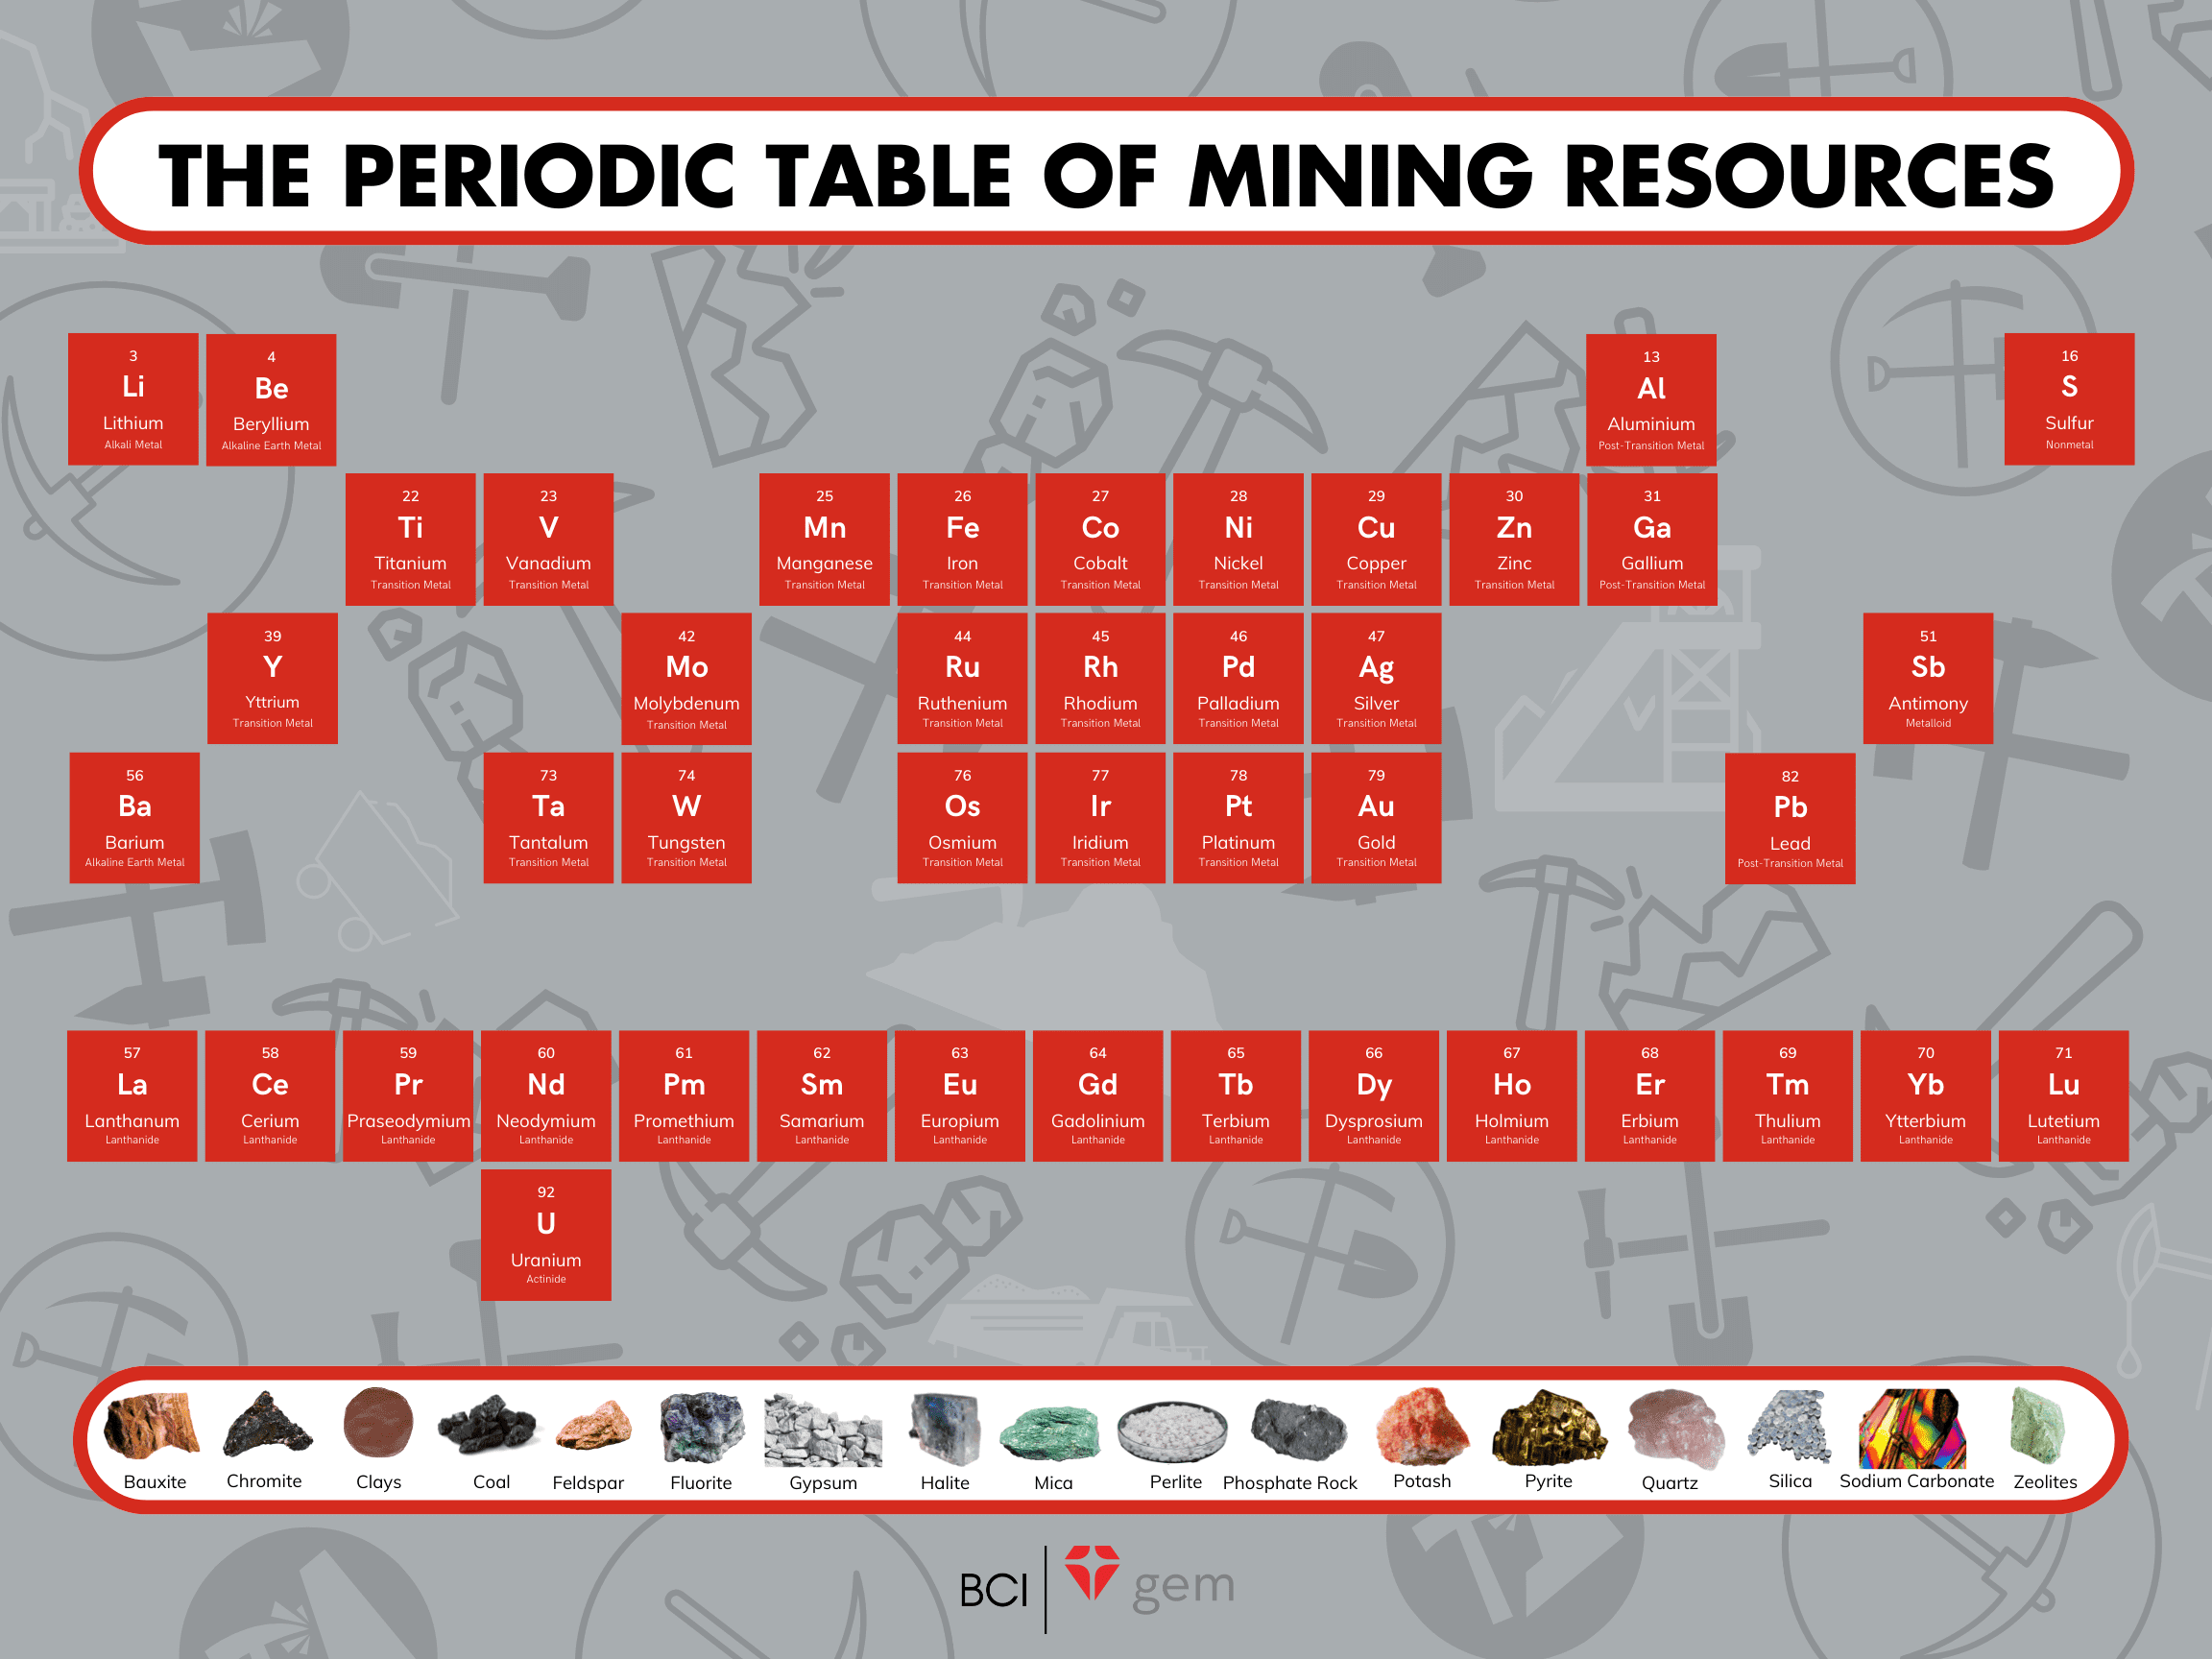 The Periodic Table of Mining Resources